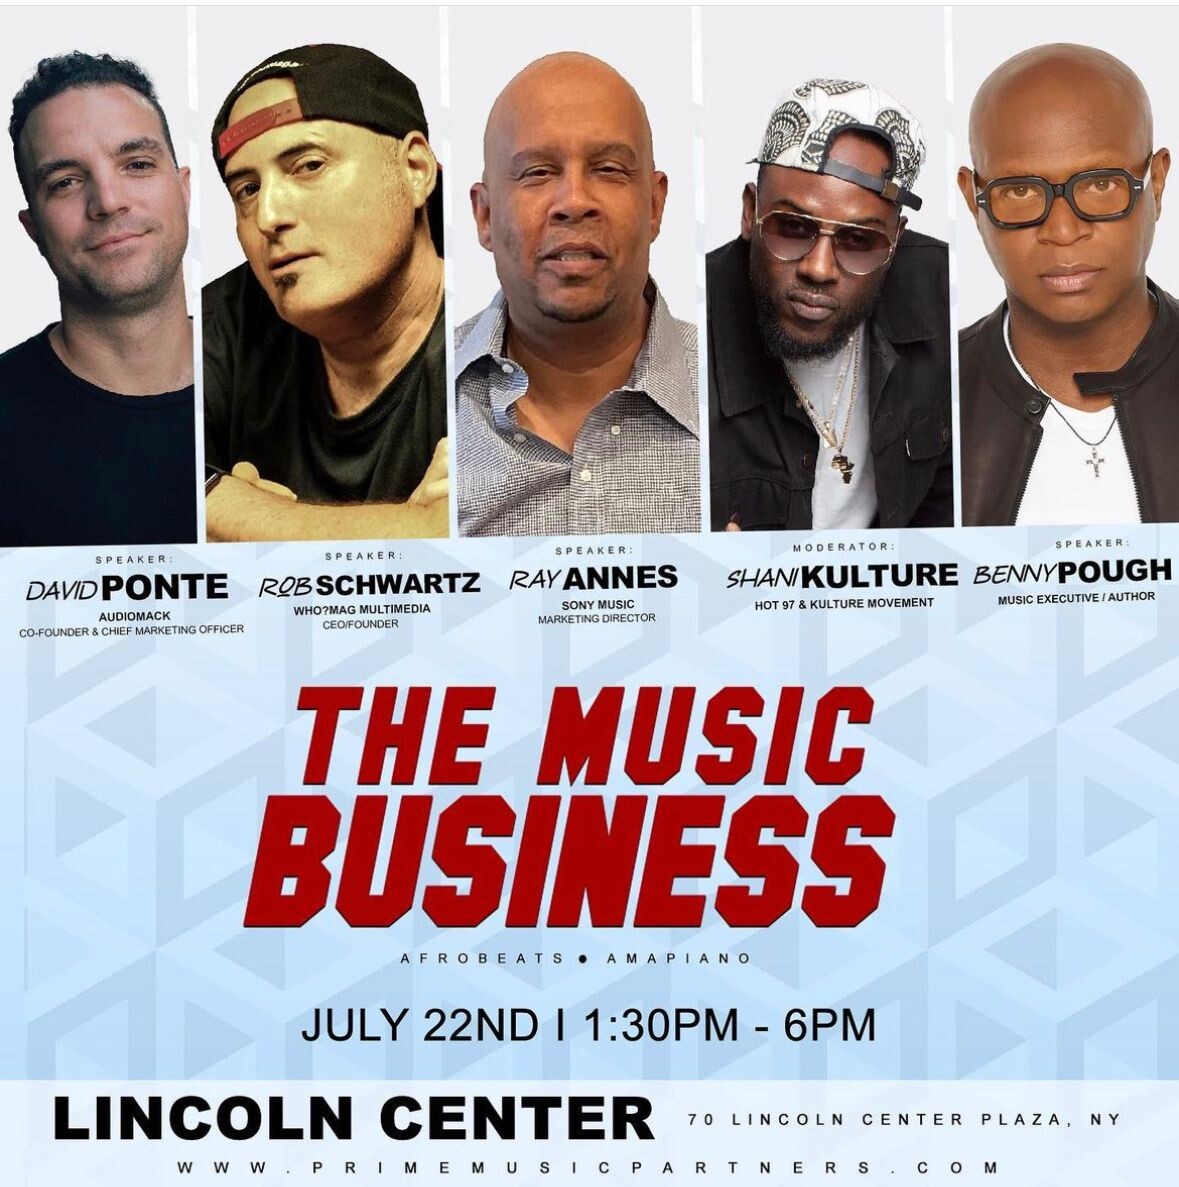 Music Business 2023: Akeju to host Audiomack Co-founder, other global music executives in Lincoln Center